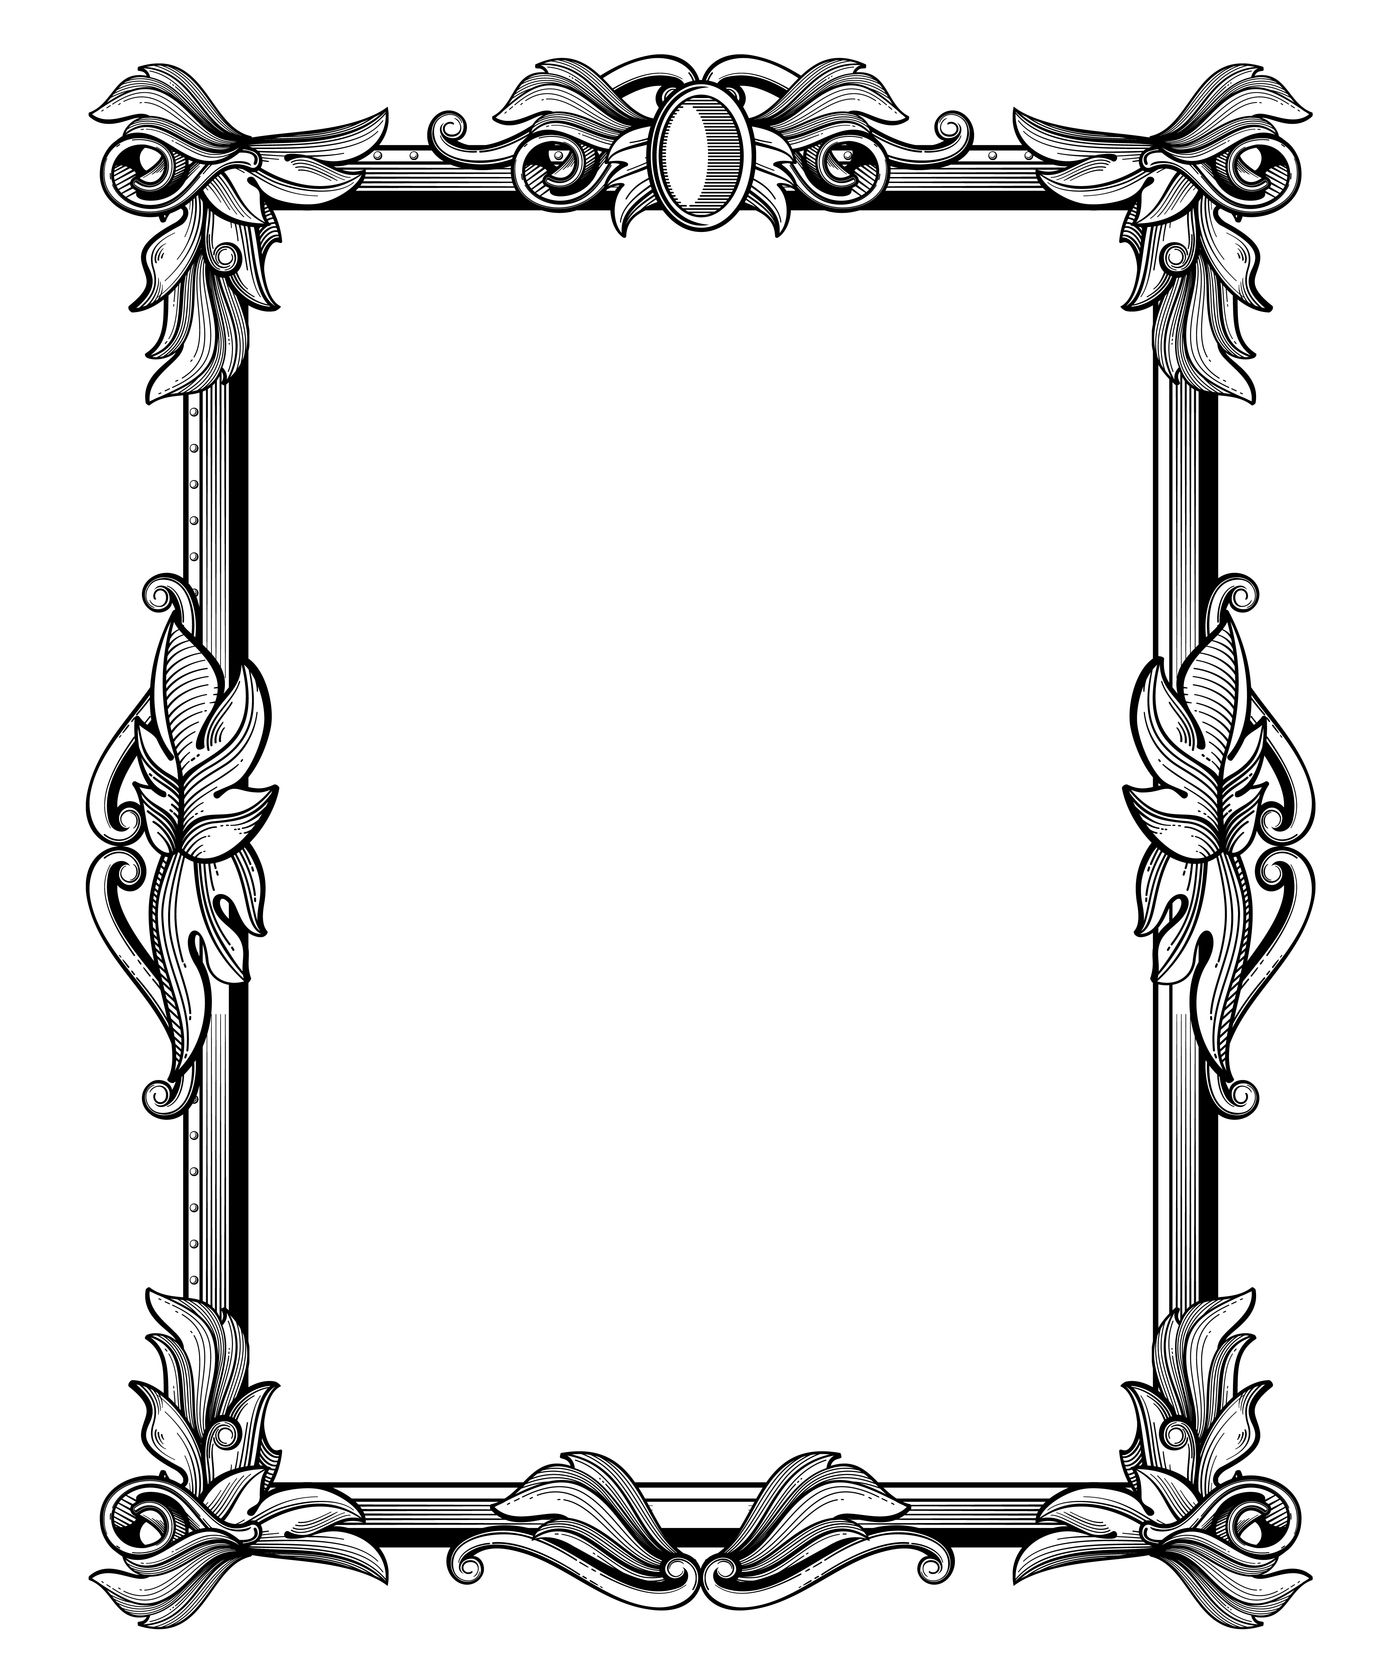 Retro Antique Baroque Border Frame With Scroll Ornaments Vector Illus By Microvector Thehungryjpeg Com